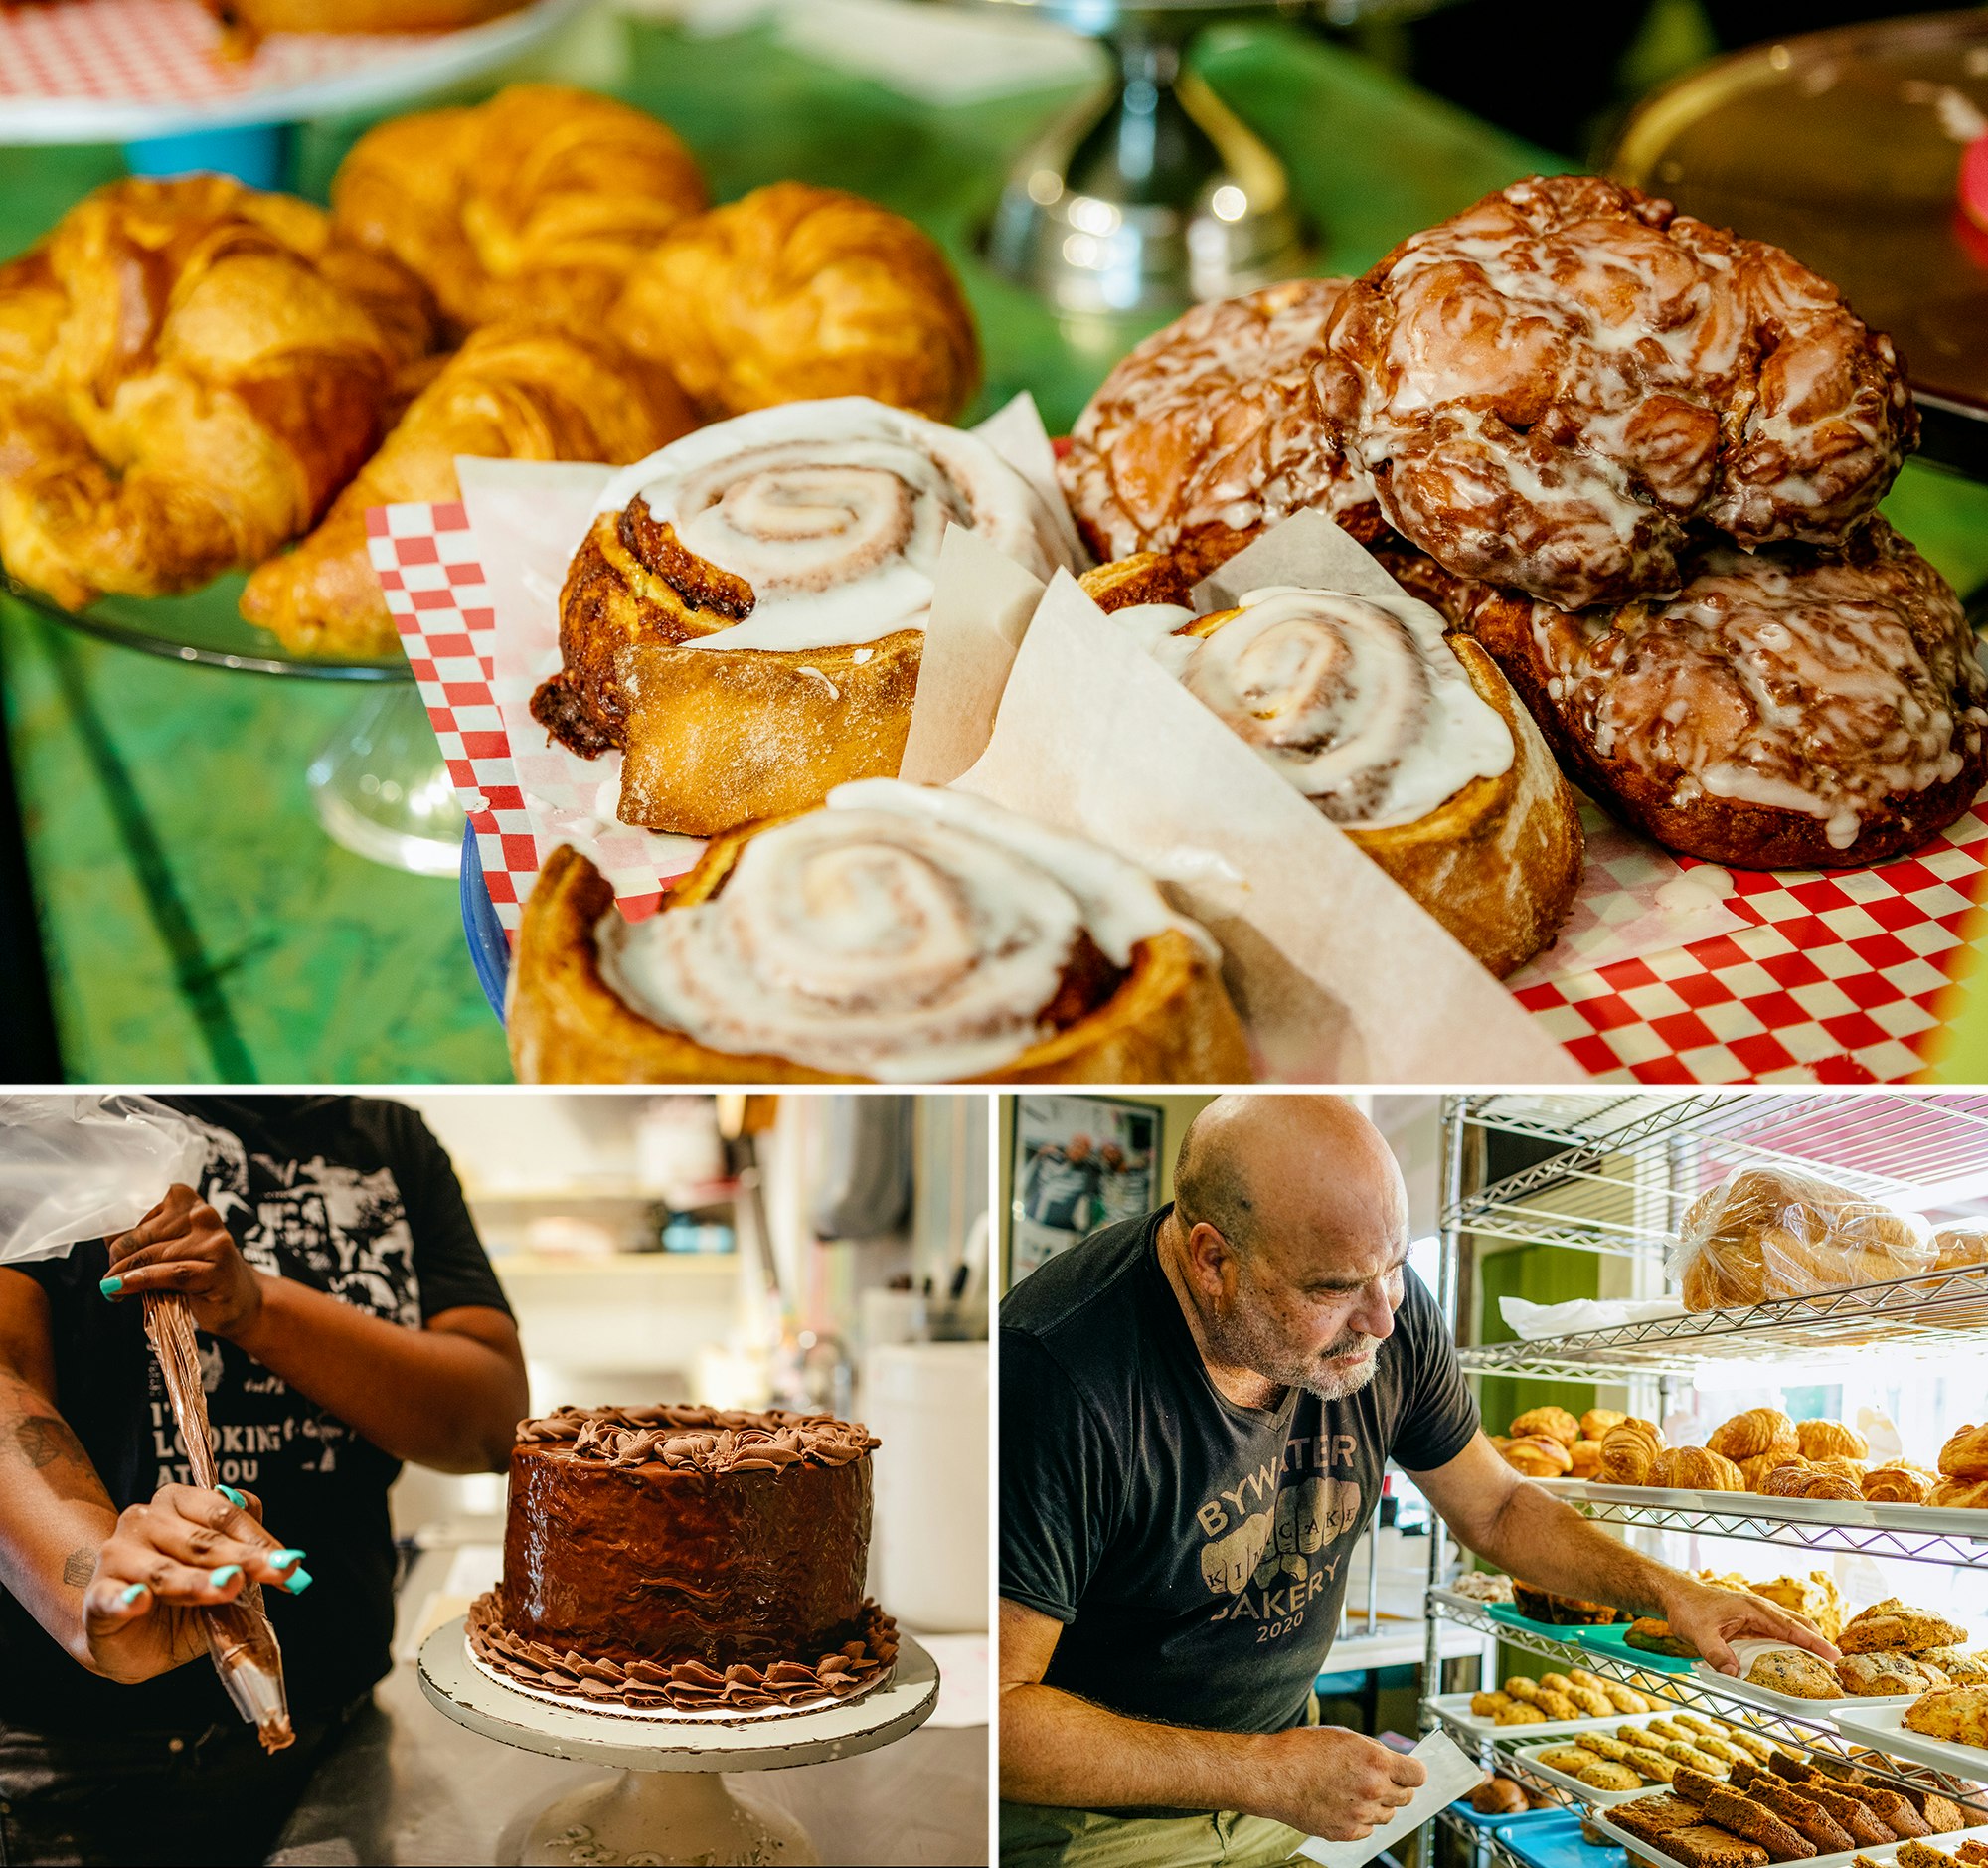 TOP: Cinnamon rolls, croissants and rolls on display at Bywater Bakery; LEFT: A bakery worker ices a chocolate cake; RIGHT: Owner, Alton Osborn grabs a scone for a customer at Bywater Bakery